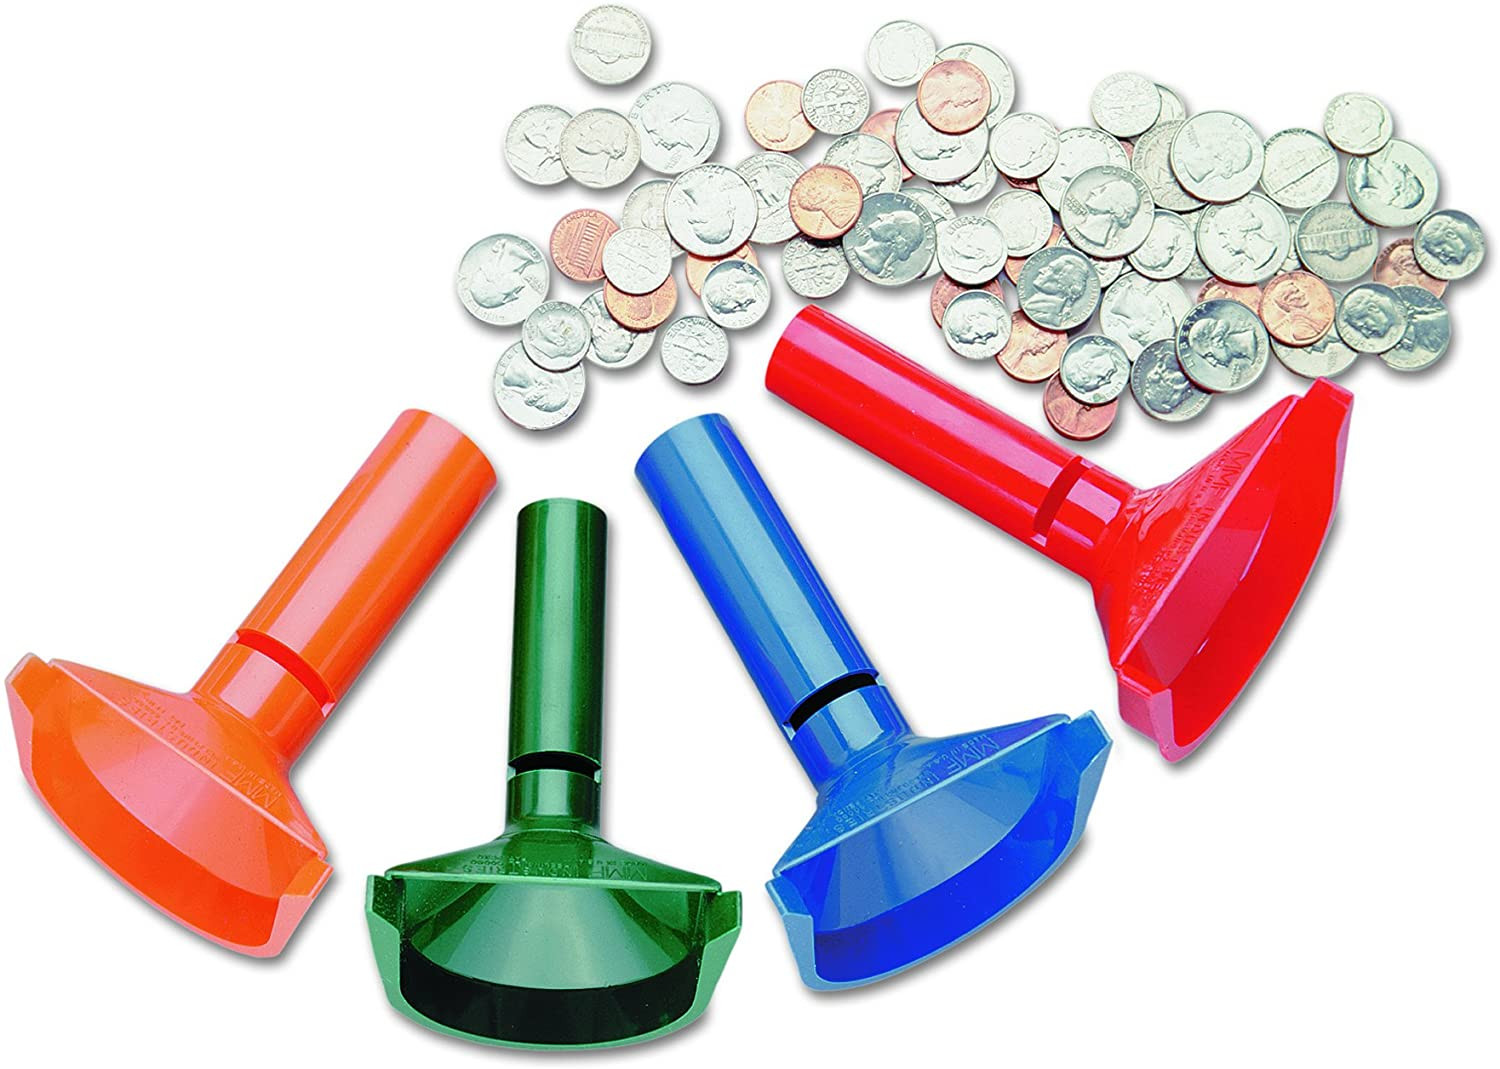 Coin Counting Tubes - 4 tube set